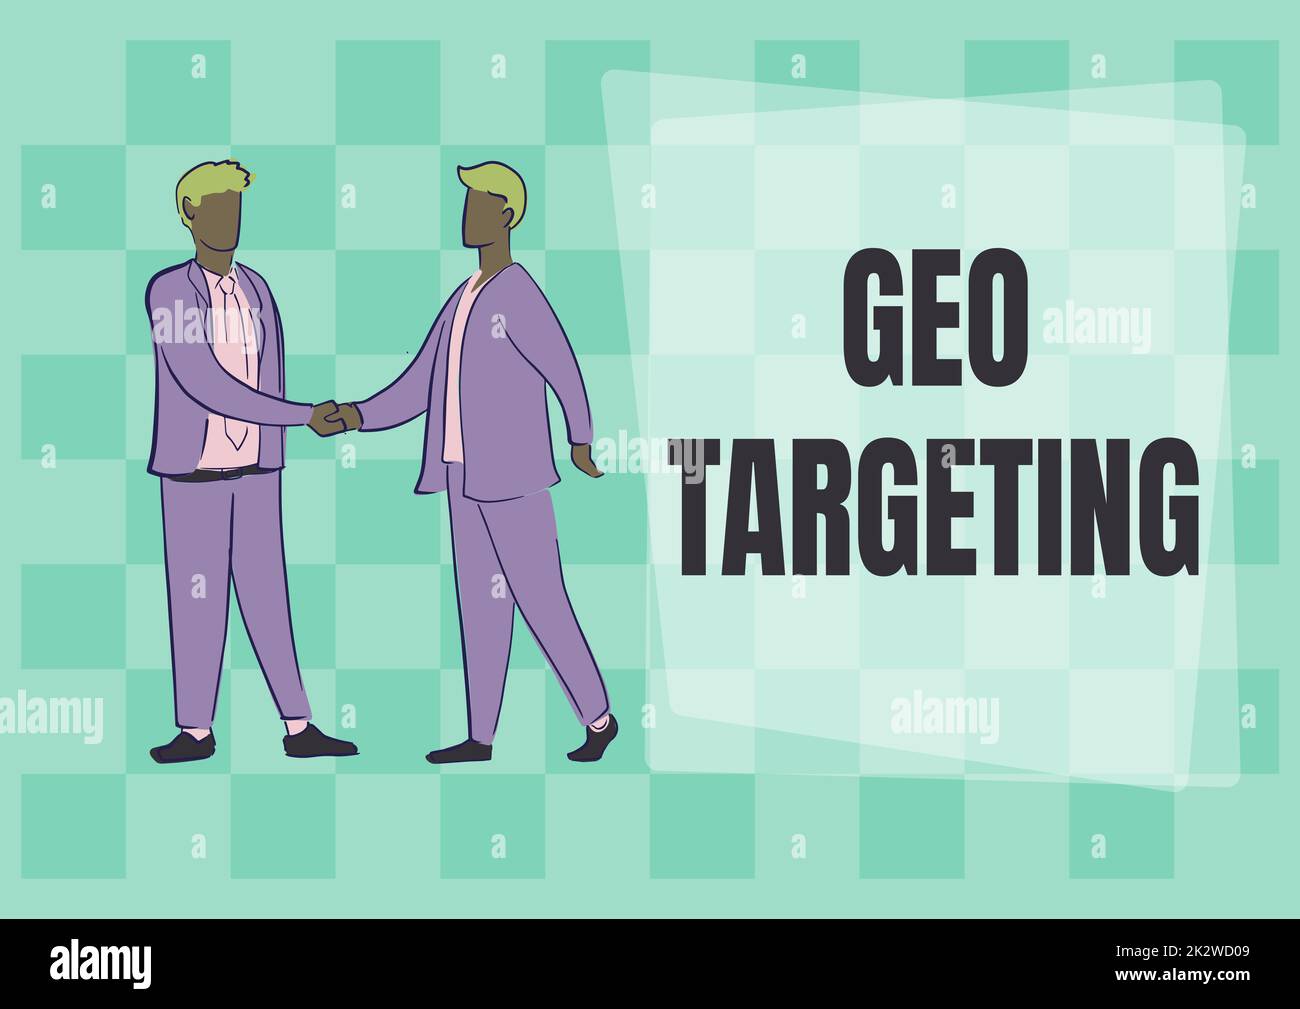 Text showing inspiration Geo Targeting. Internet Concept Digital Ads Views IP Address Adwords Campaigns Location Two colleagues shaking hands congratulating successful teamwork. Stock Photo